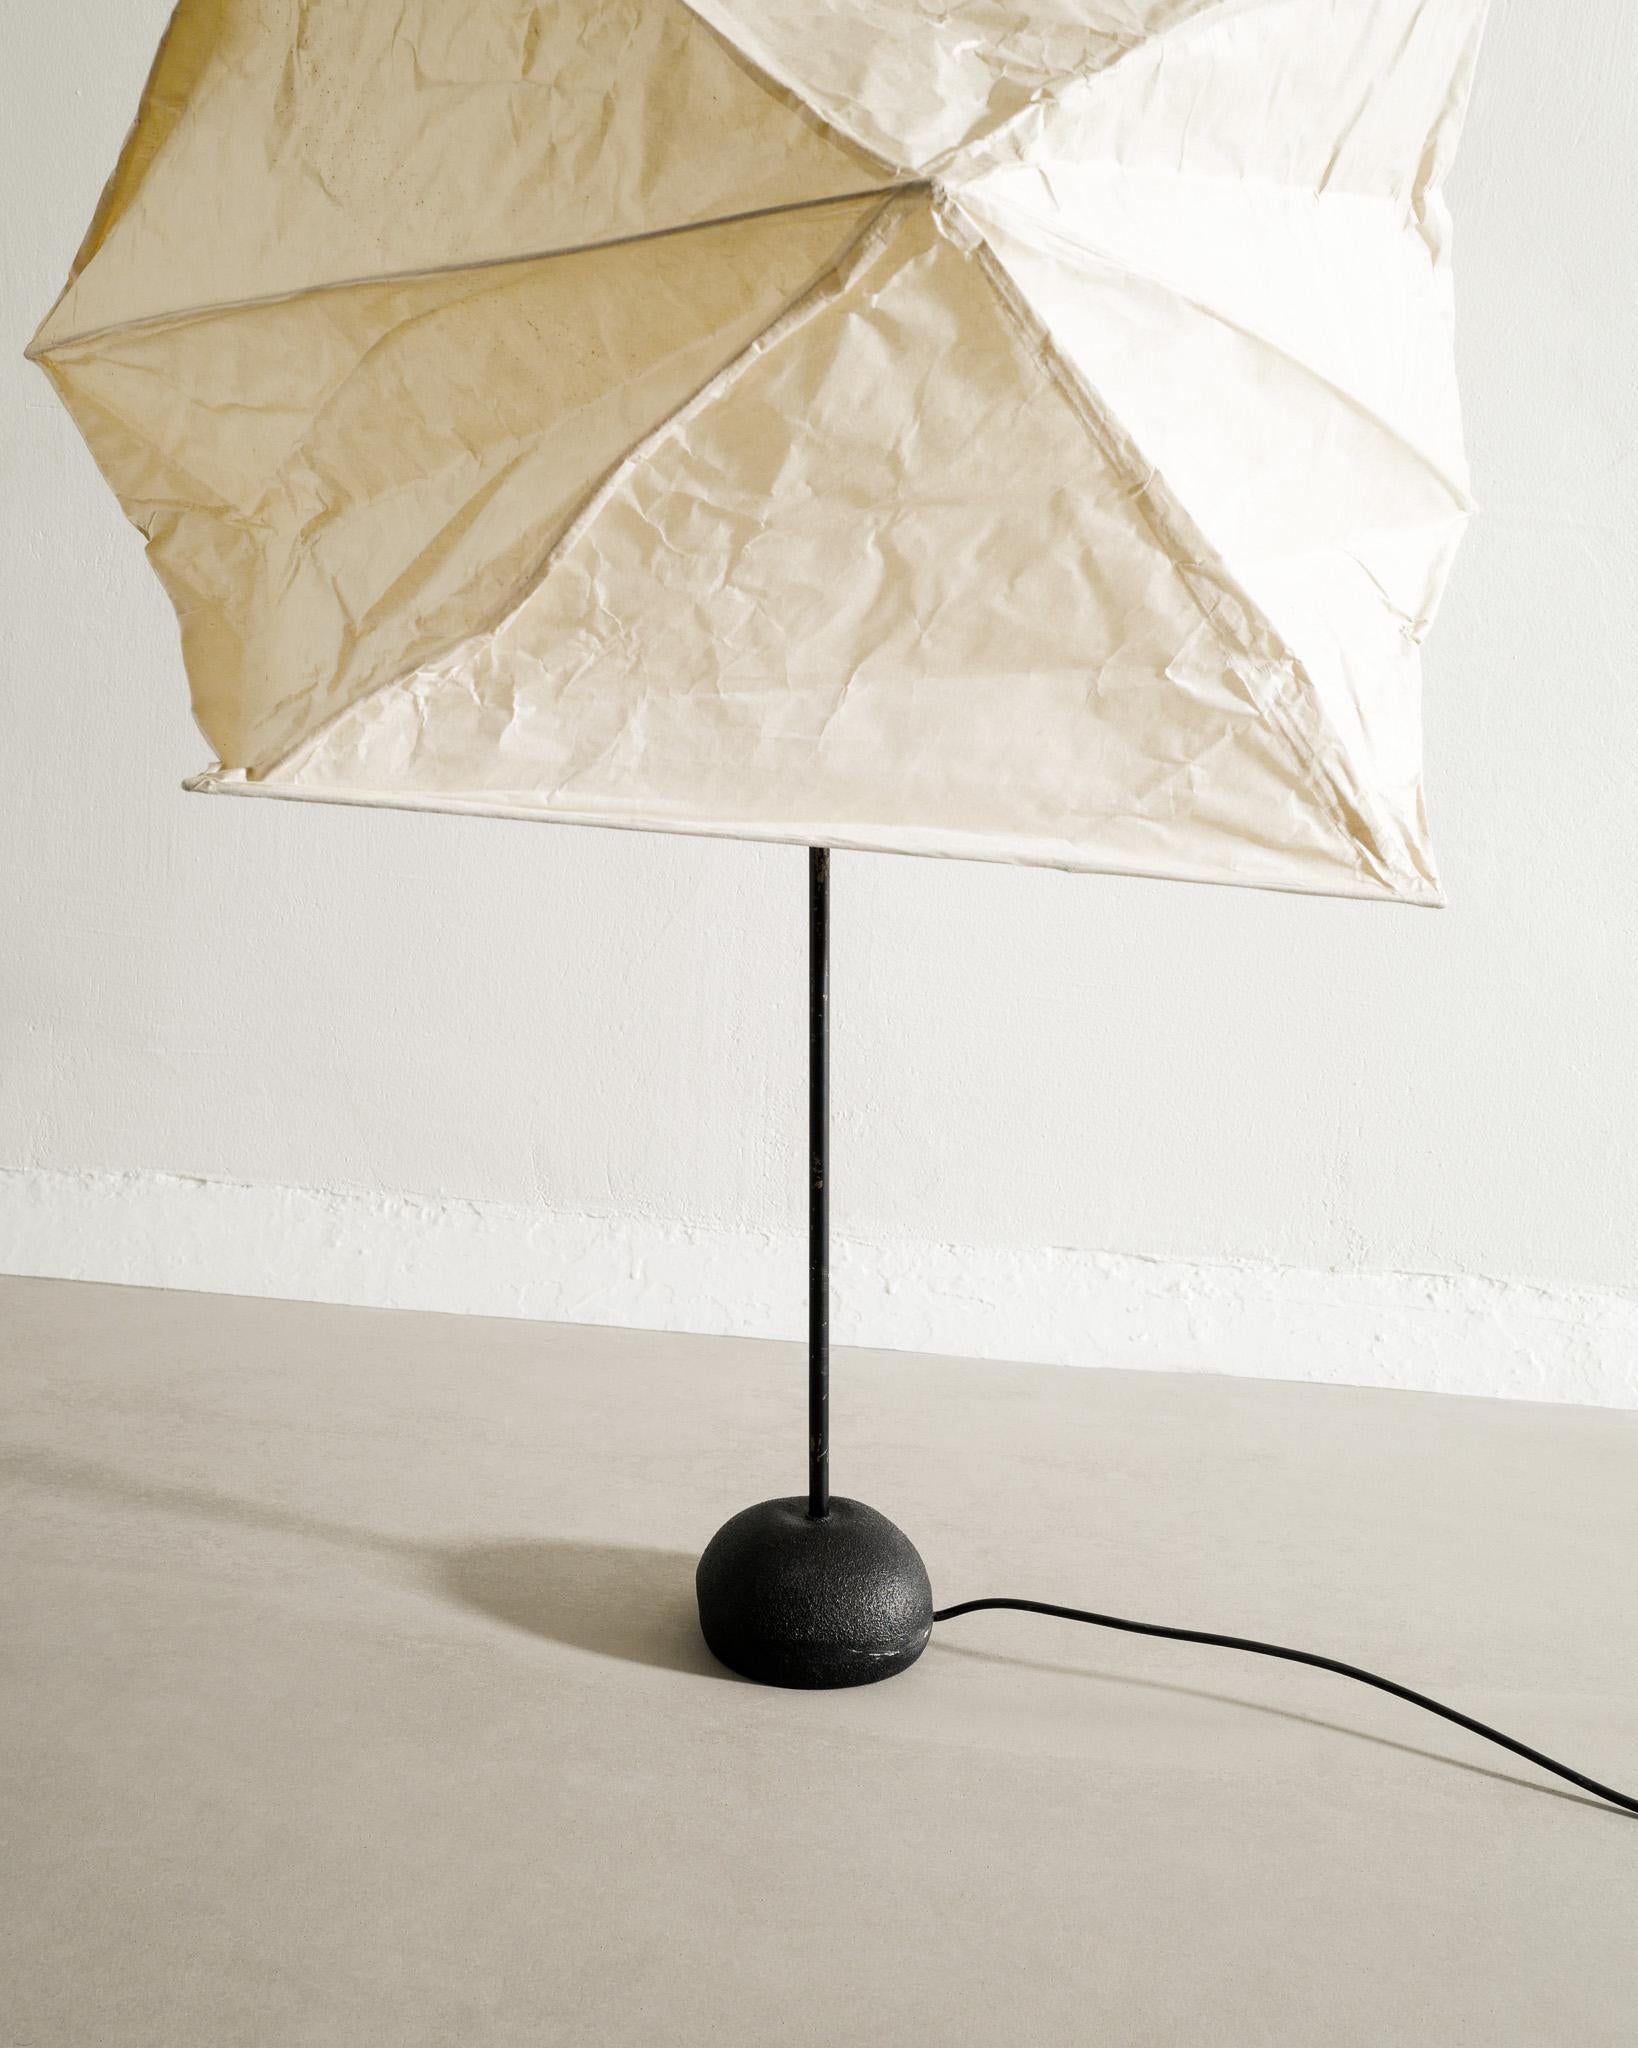 Japanese Early Mid Century L4 Isamu Noguchi Floor Lamp Produced by Ozeki & Co Japan 1950s For Sale